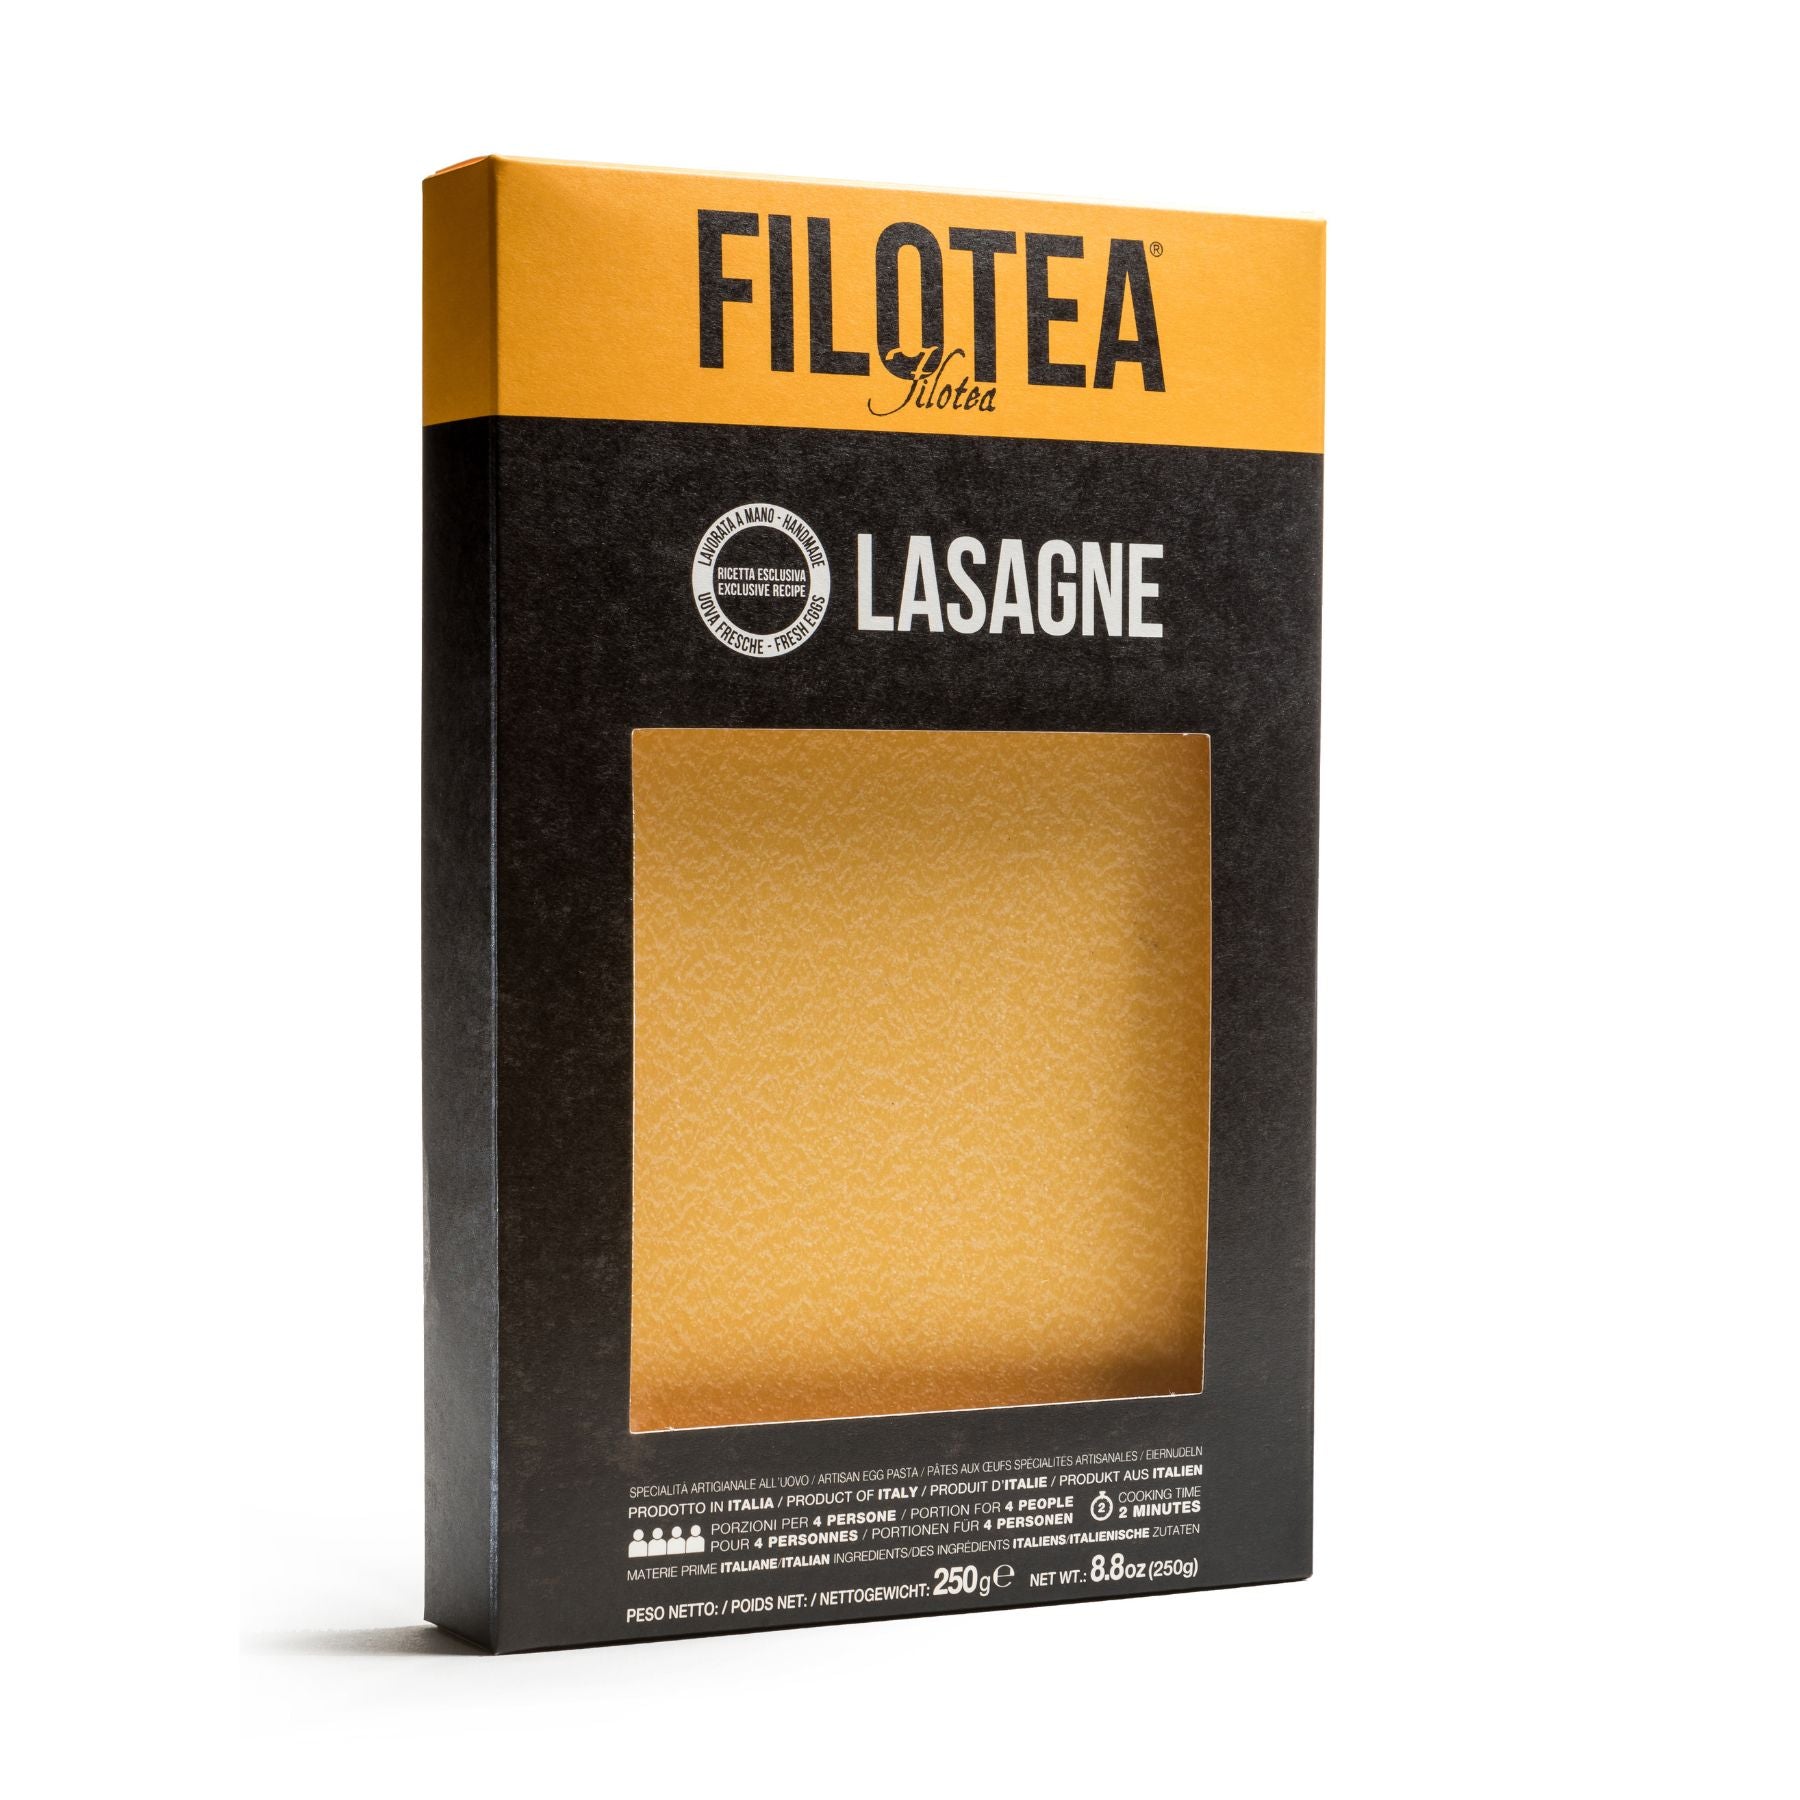 Filotea Lasagne Artisan Egg Pasta 250g | Imported and distributed in the UK by Just Gourmet Foods